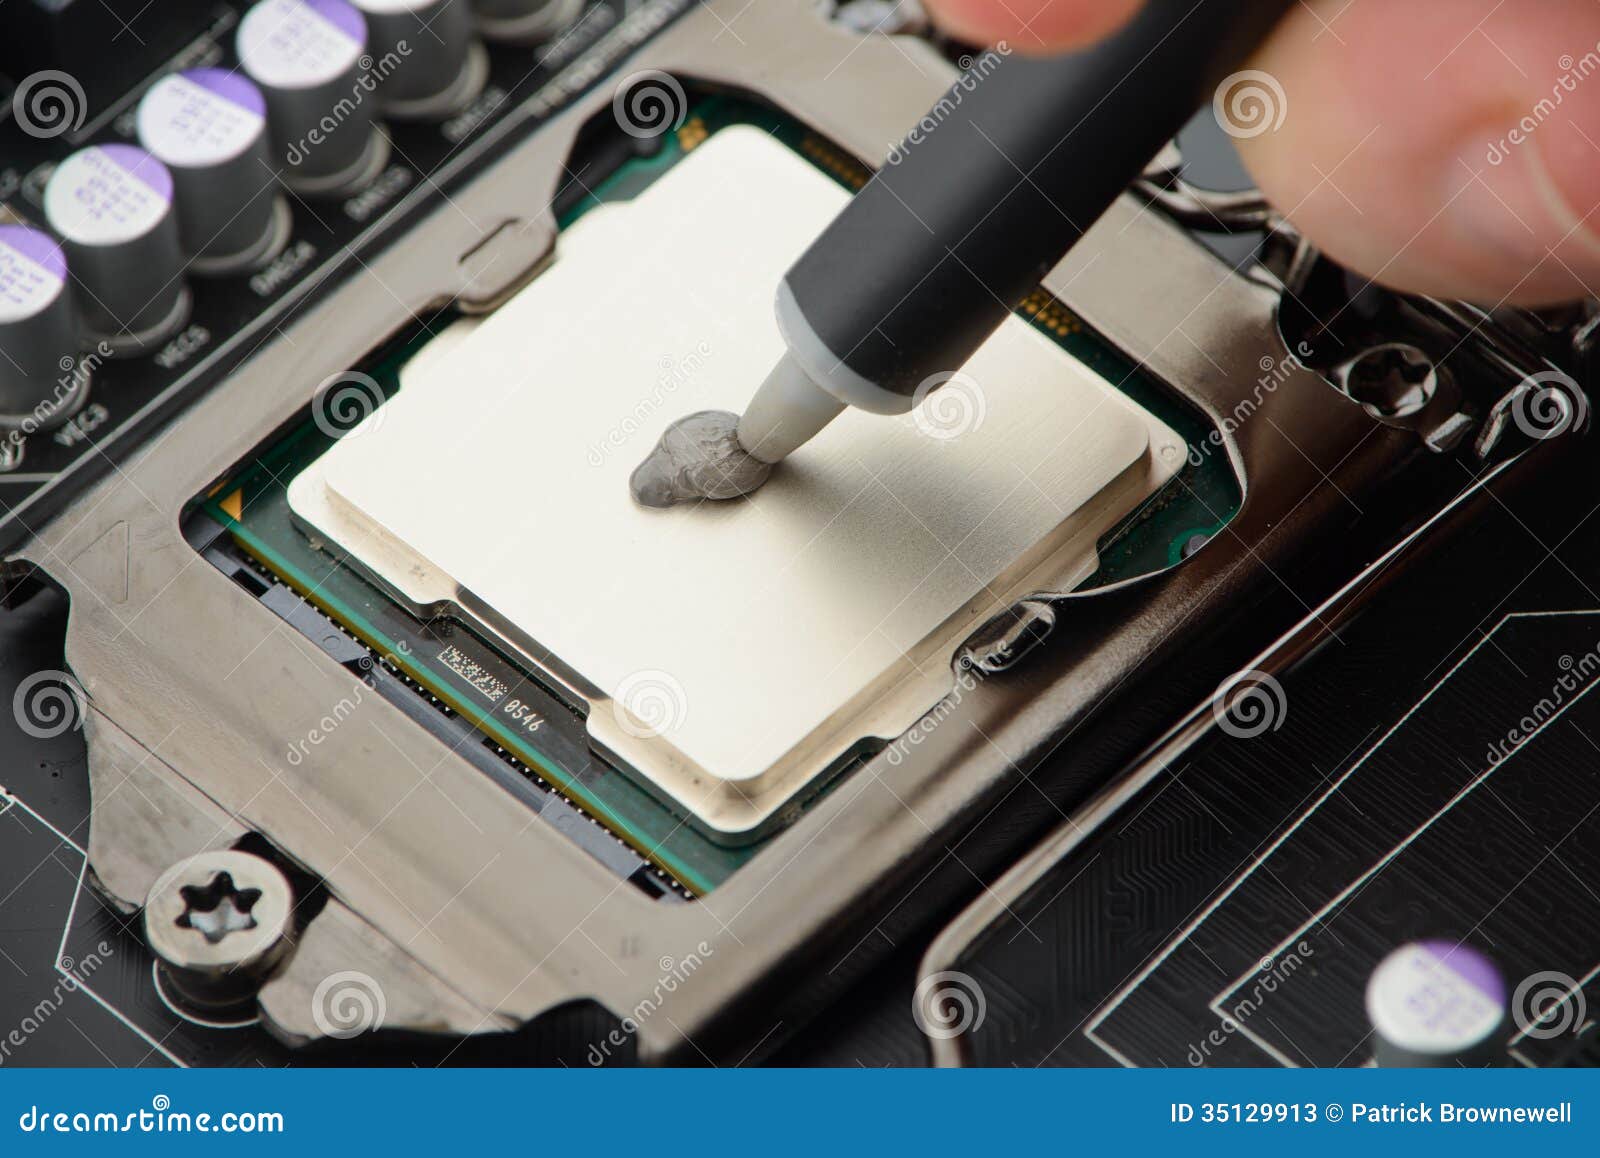 applying-thermal-paste-to-cpu-processor-